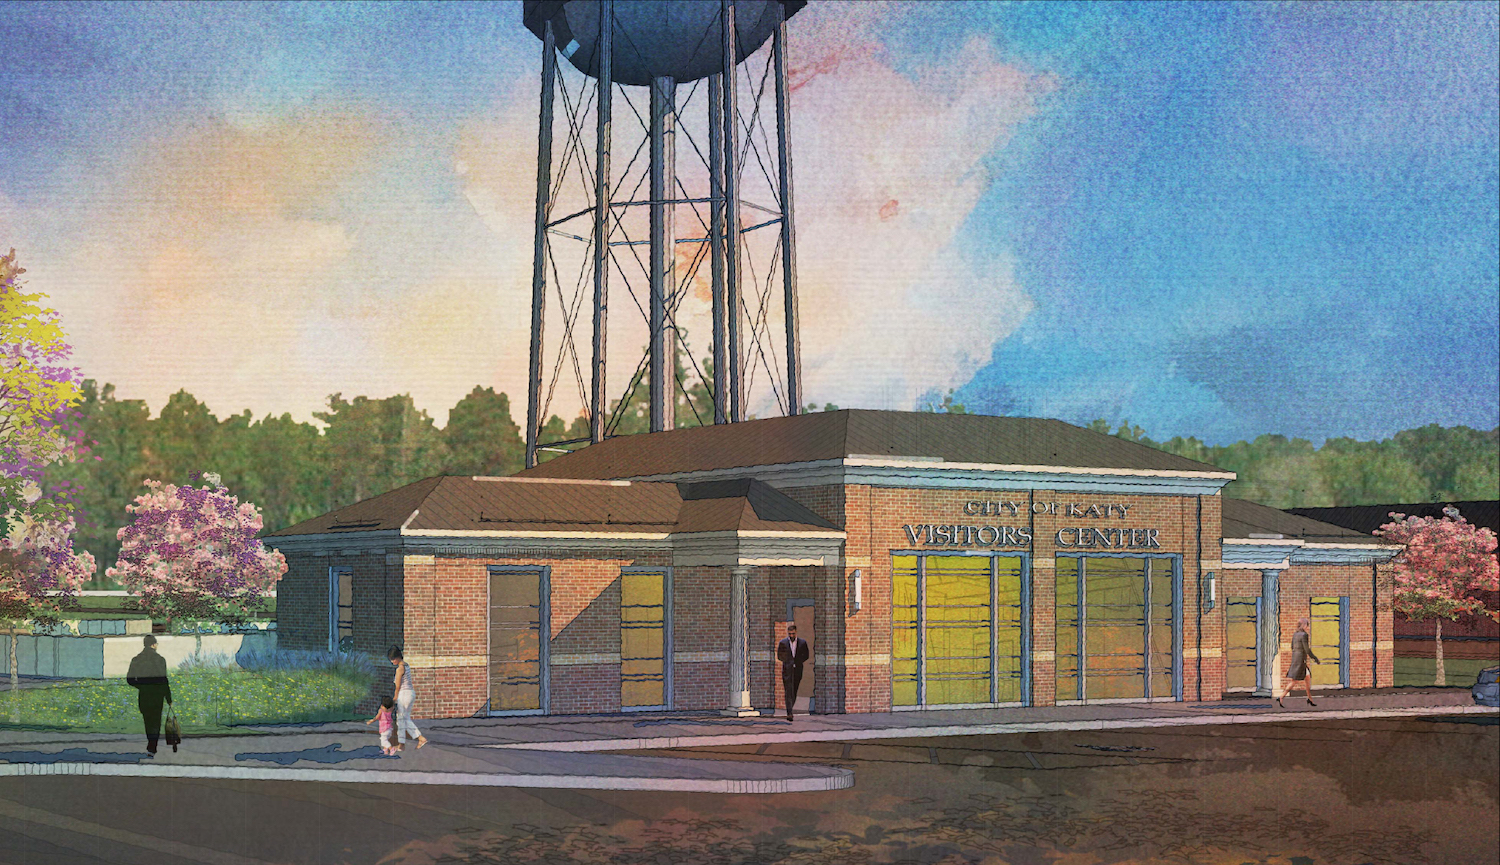 City of Katy awards $2.15M contract for civic and visitor center construction Main Photo